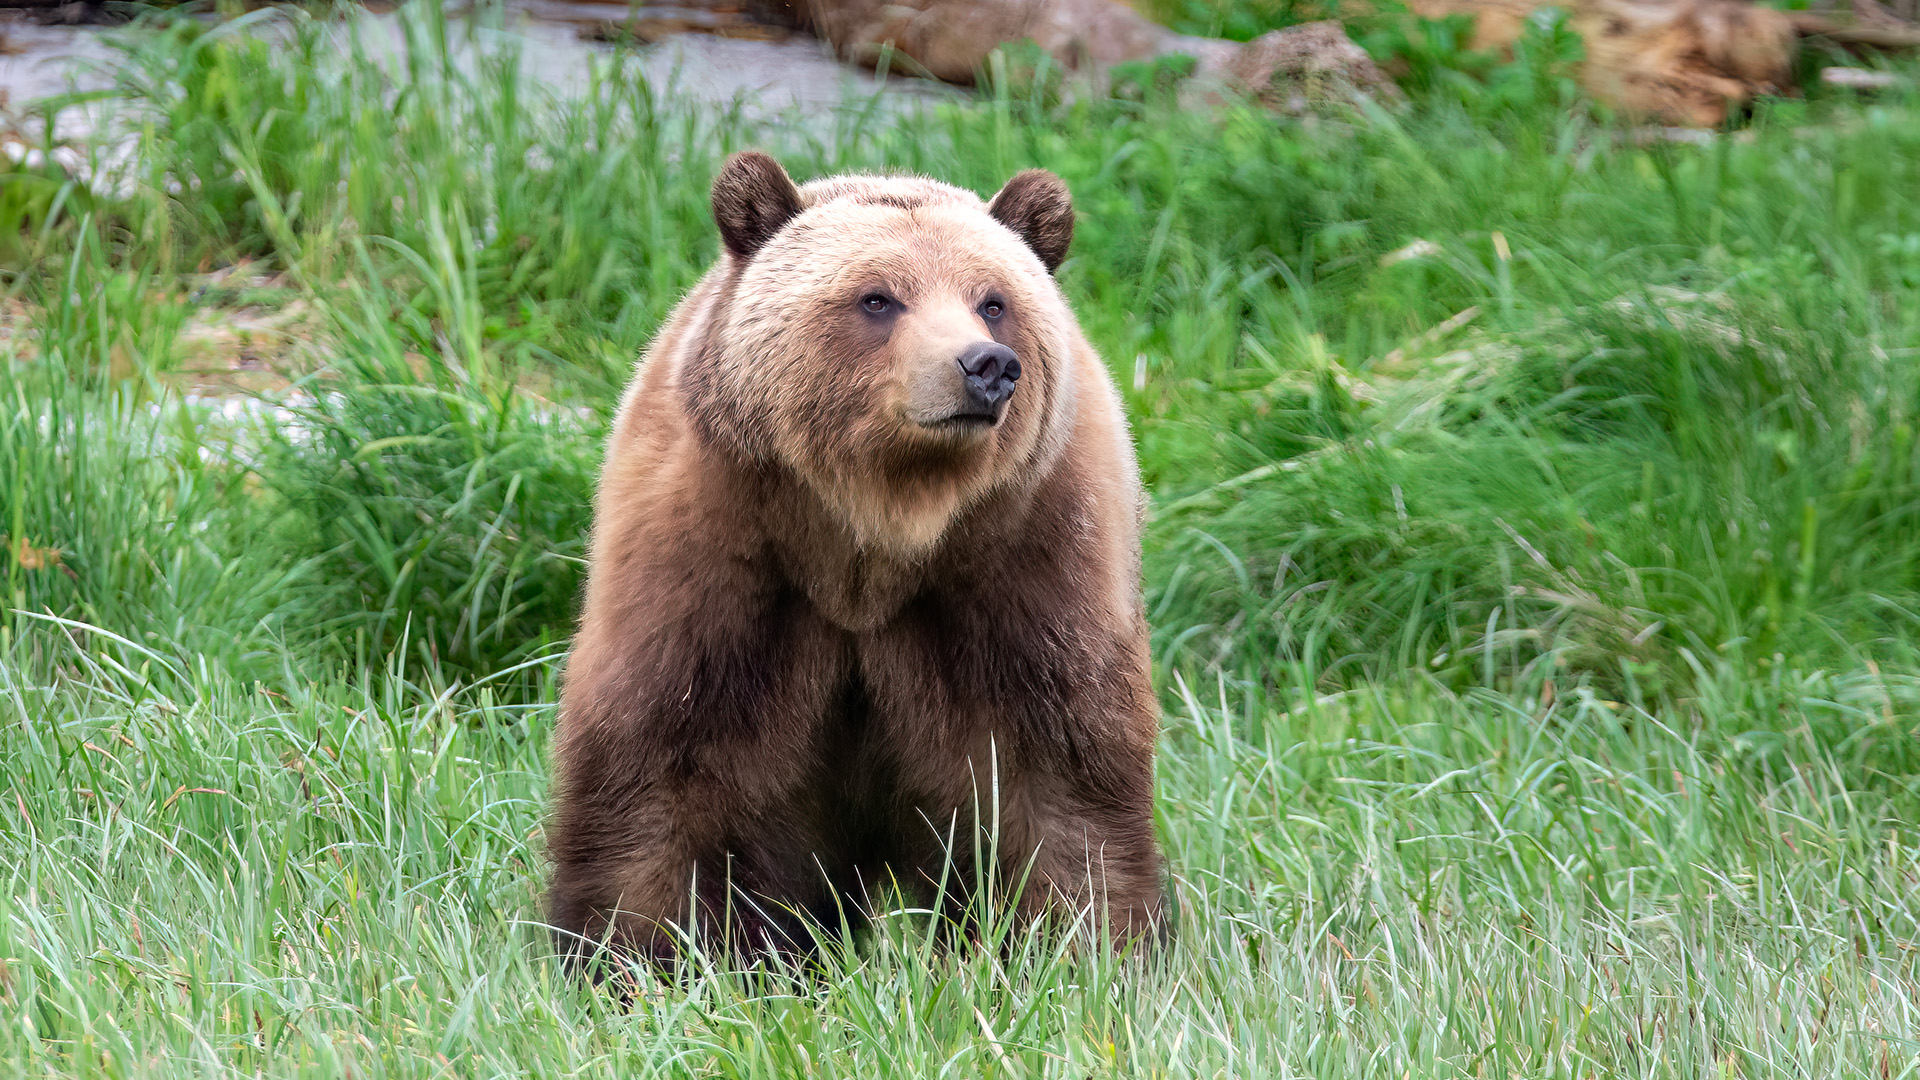 This young female brown bear was around 7 or 8 in this picture. I’ve watched her each year since she was a yearling cub. One of her distinct features is her eyes; much darker fur around the eyes with very blonde hair on the rest of her face makes her easily recognizable.